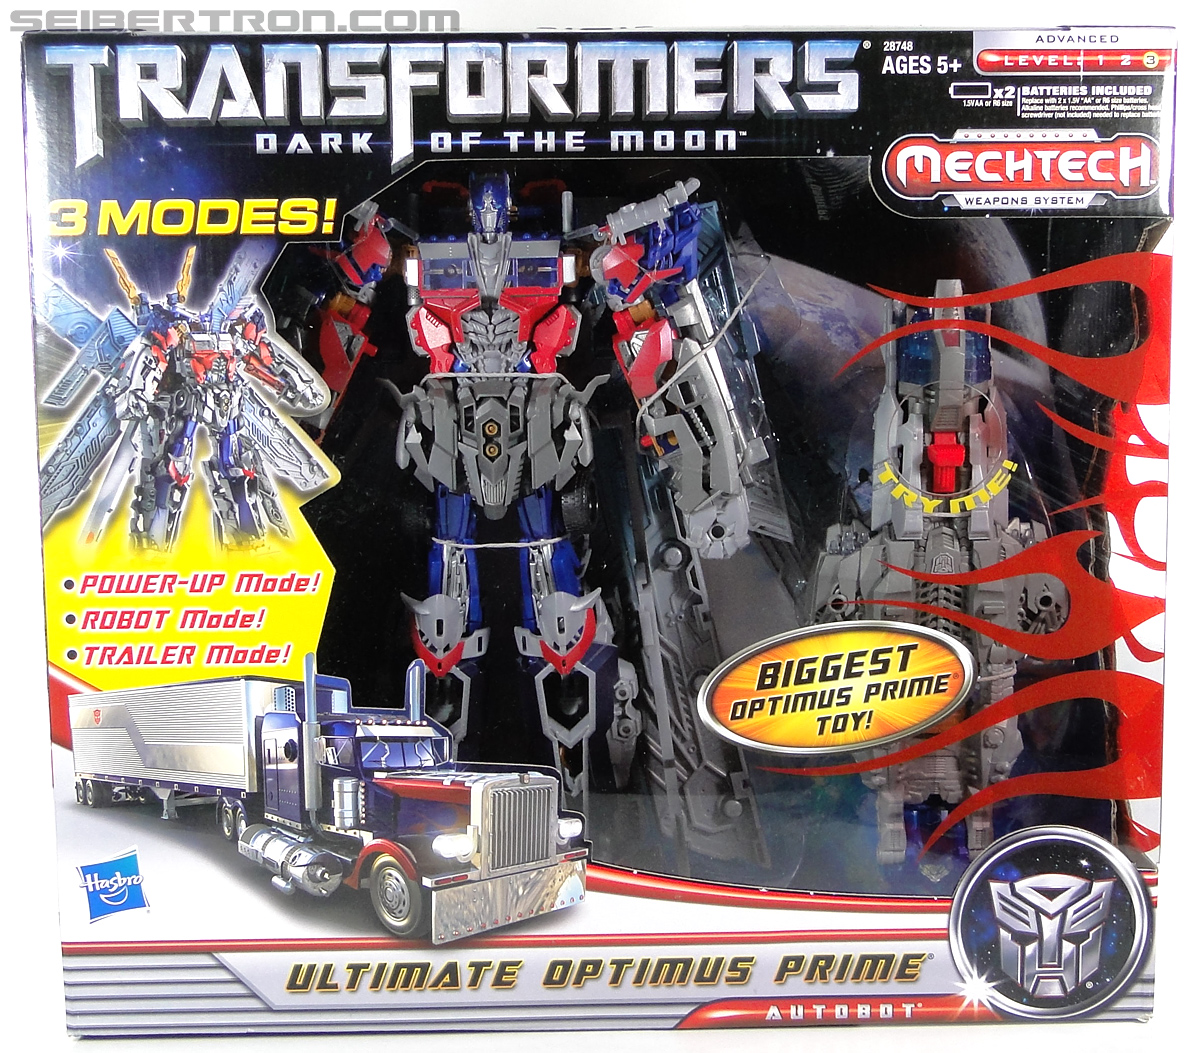 Is This Really The ULTIMATE Optimus Prime  #transformers Dark Of The Moon  Ultimate Optimus Prime 